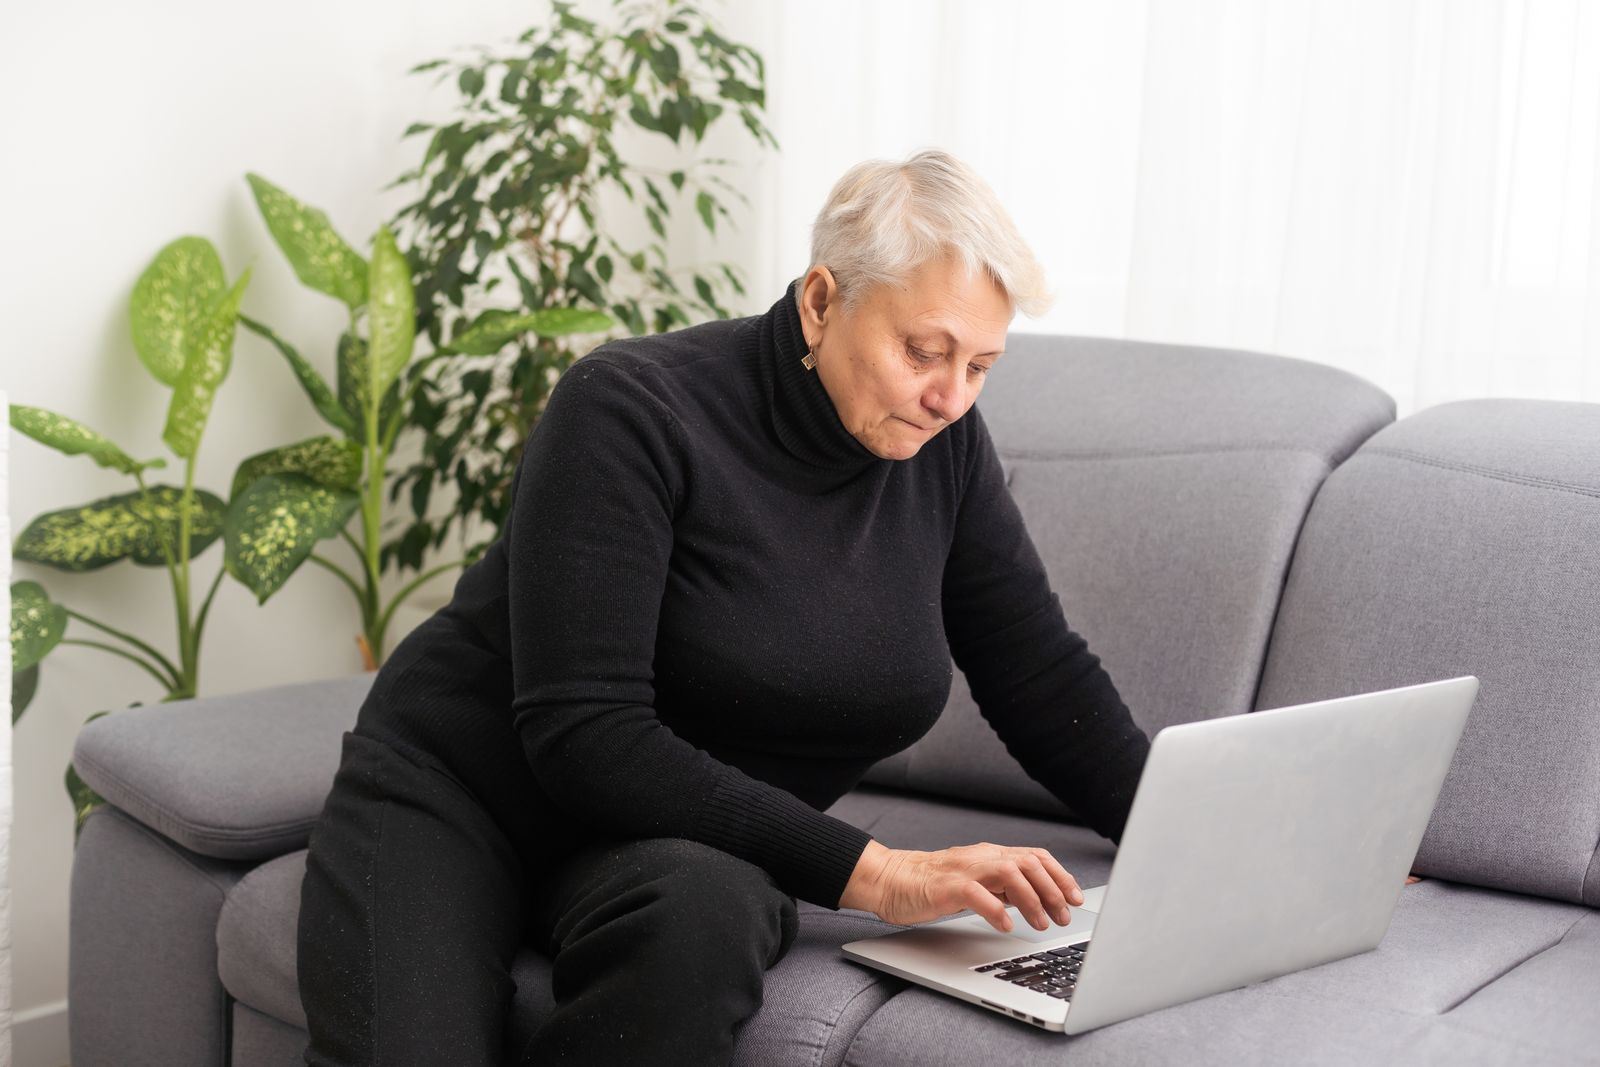 618-50394892front-view-concentrated-pleasant-mature-older-woman-looking-at-computer-16813086727466.jpg